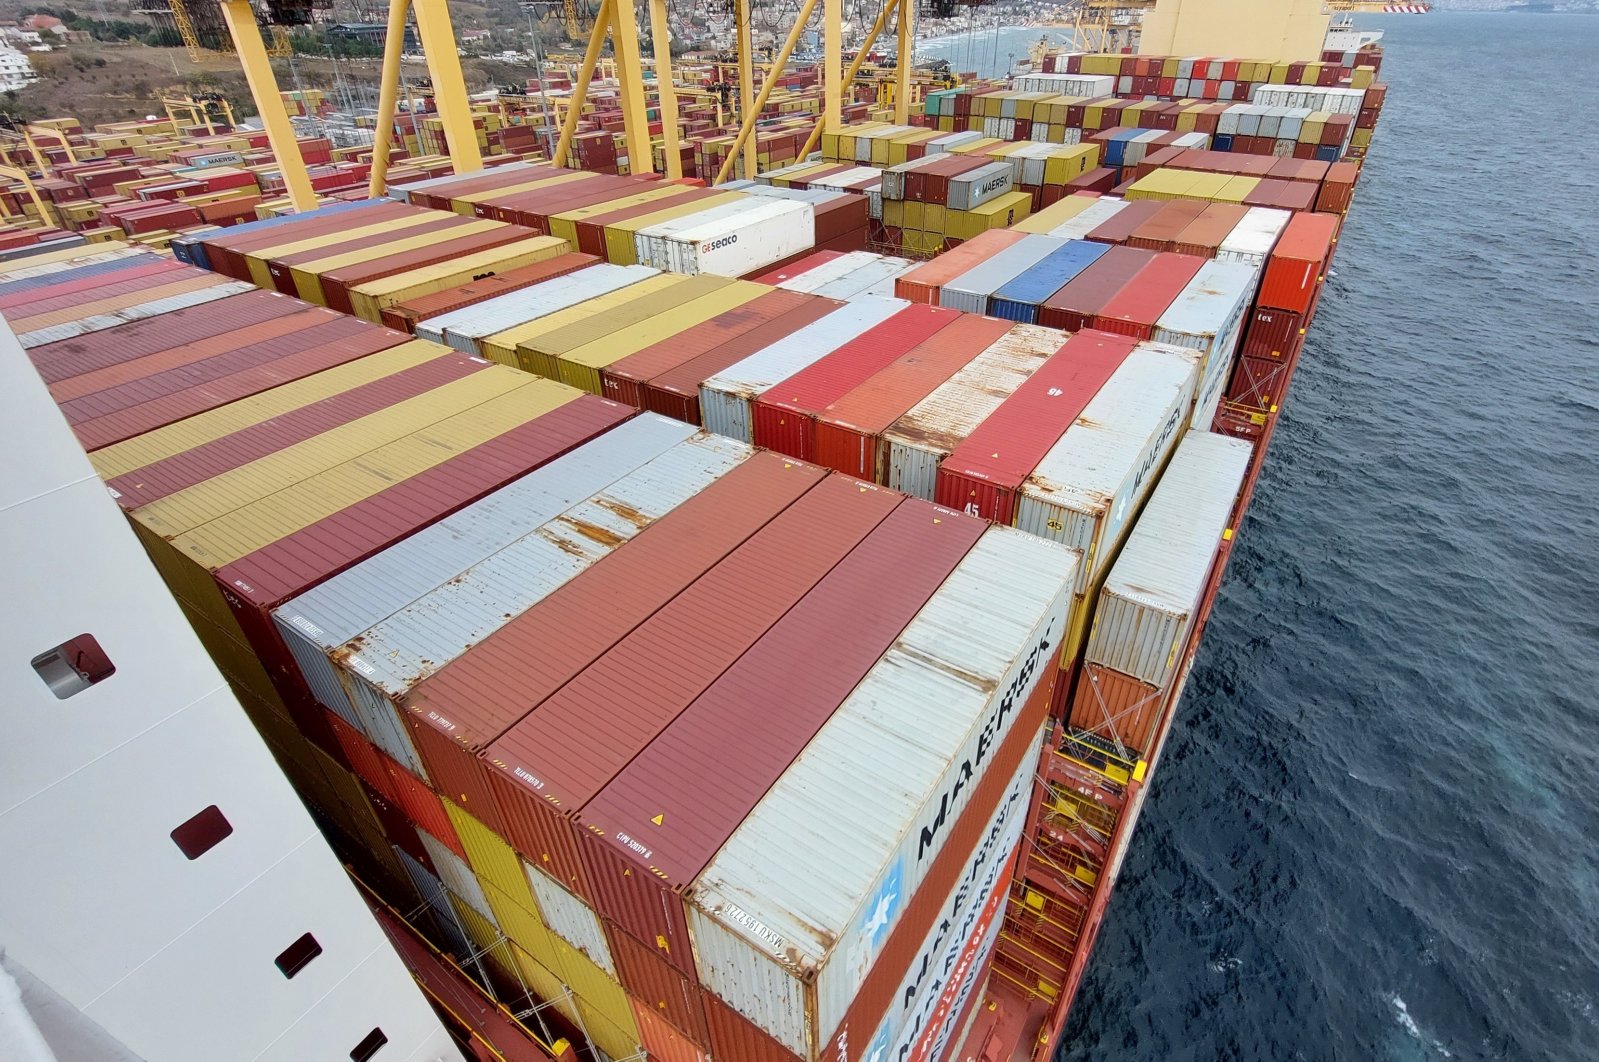 Containers are seen at a Turkish port, April 4, 2022 (IHA Photo)